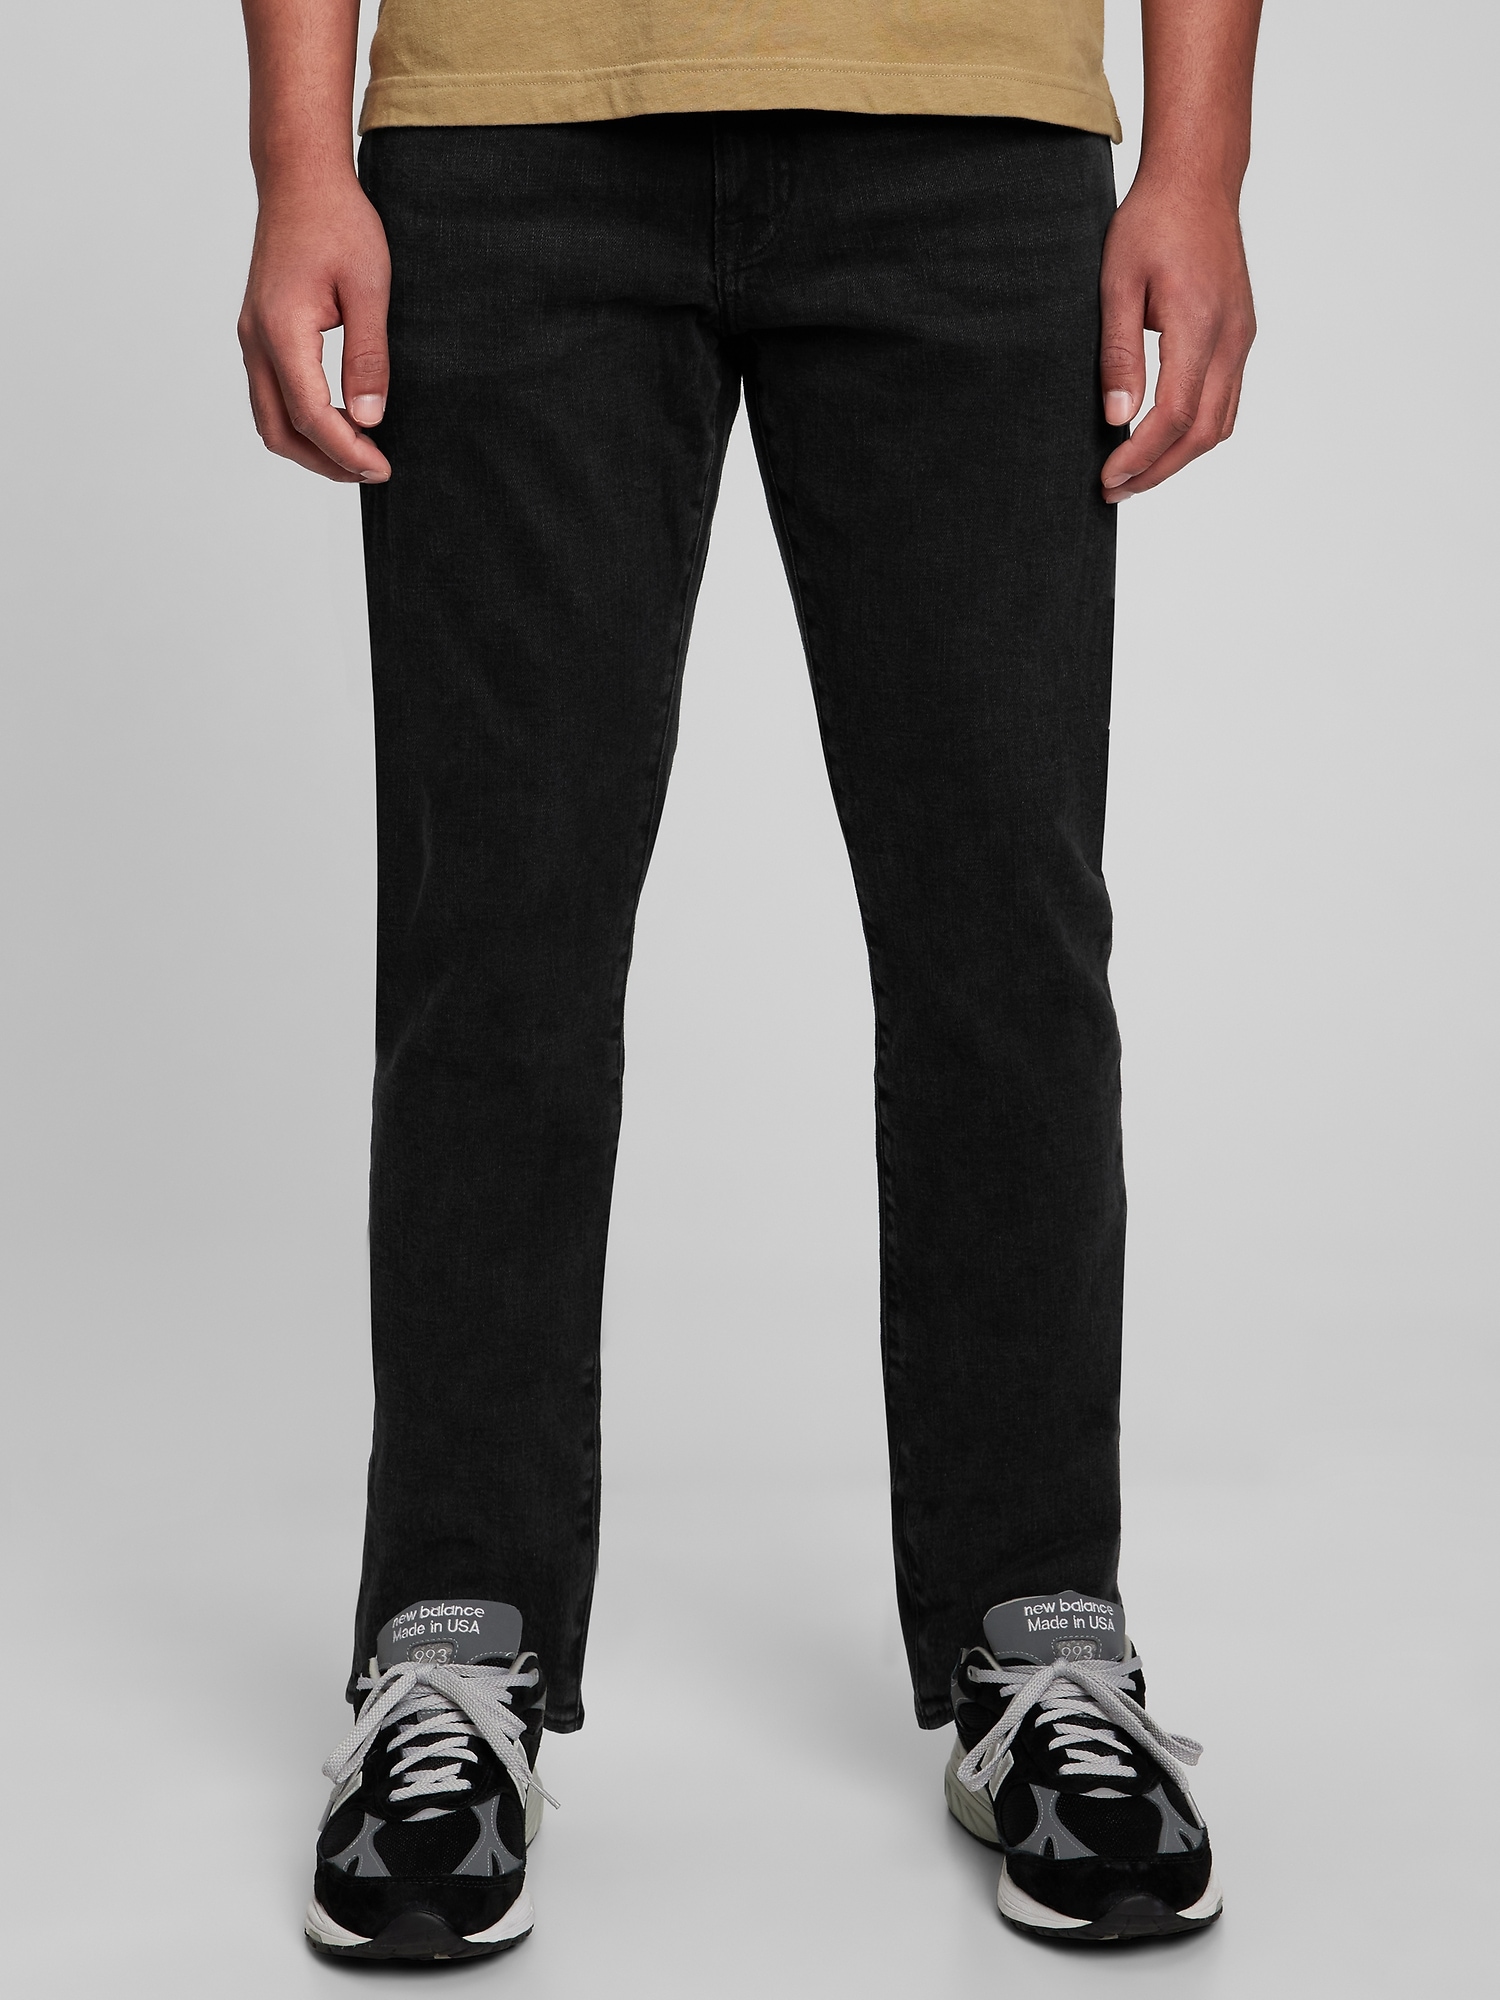 Gap Everyday Slim Jeans In Flex With Washwell In Washed Black